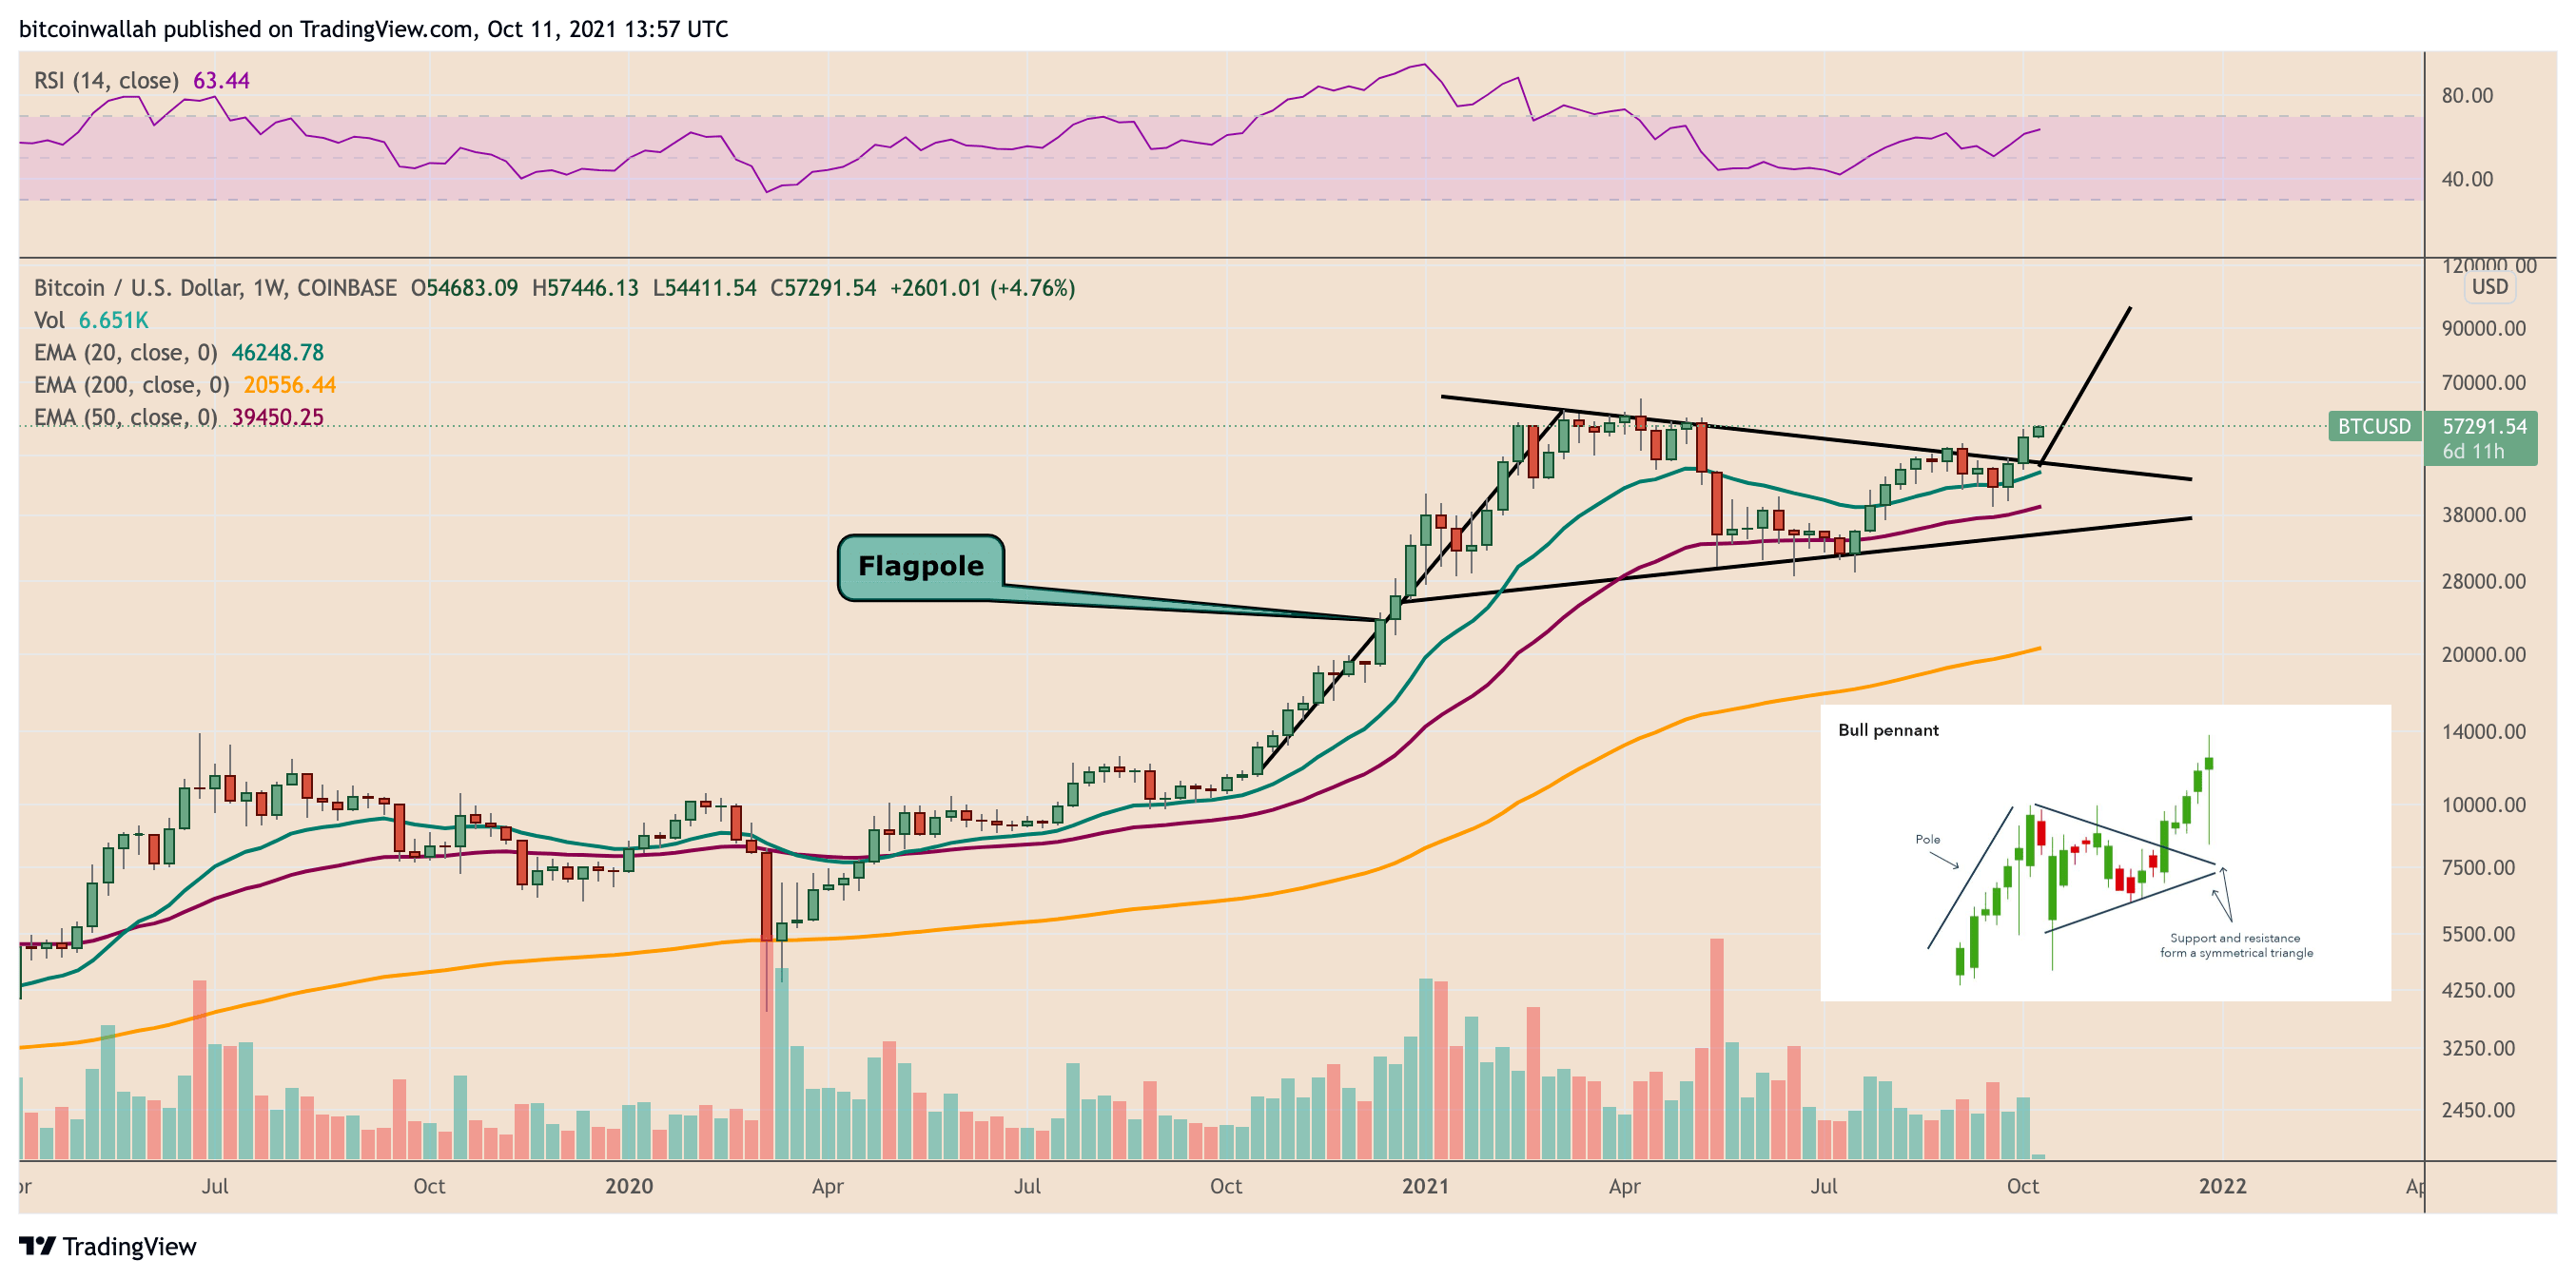 Bitcoin (BTC) Price Tops $57,000, New All-Time High Coming Soon?